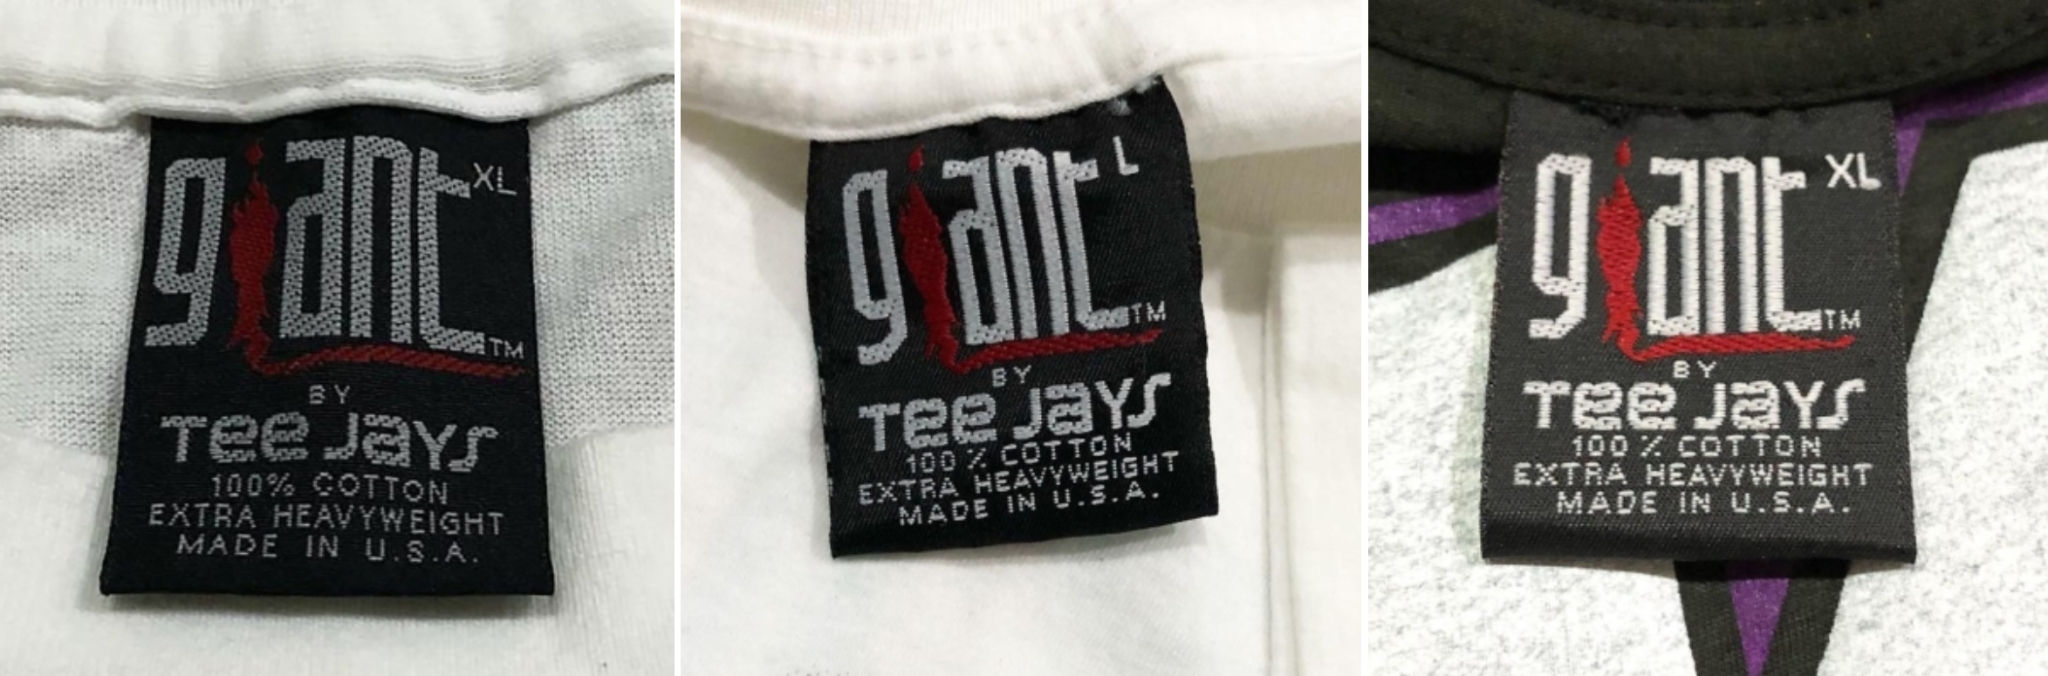 Fake Giant By Tee Jays T-Shirt Tags